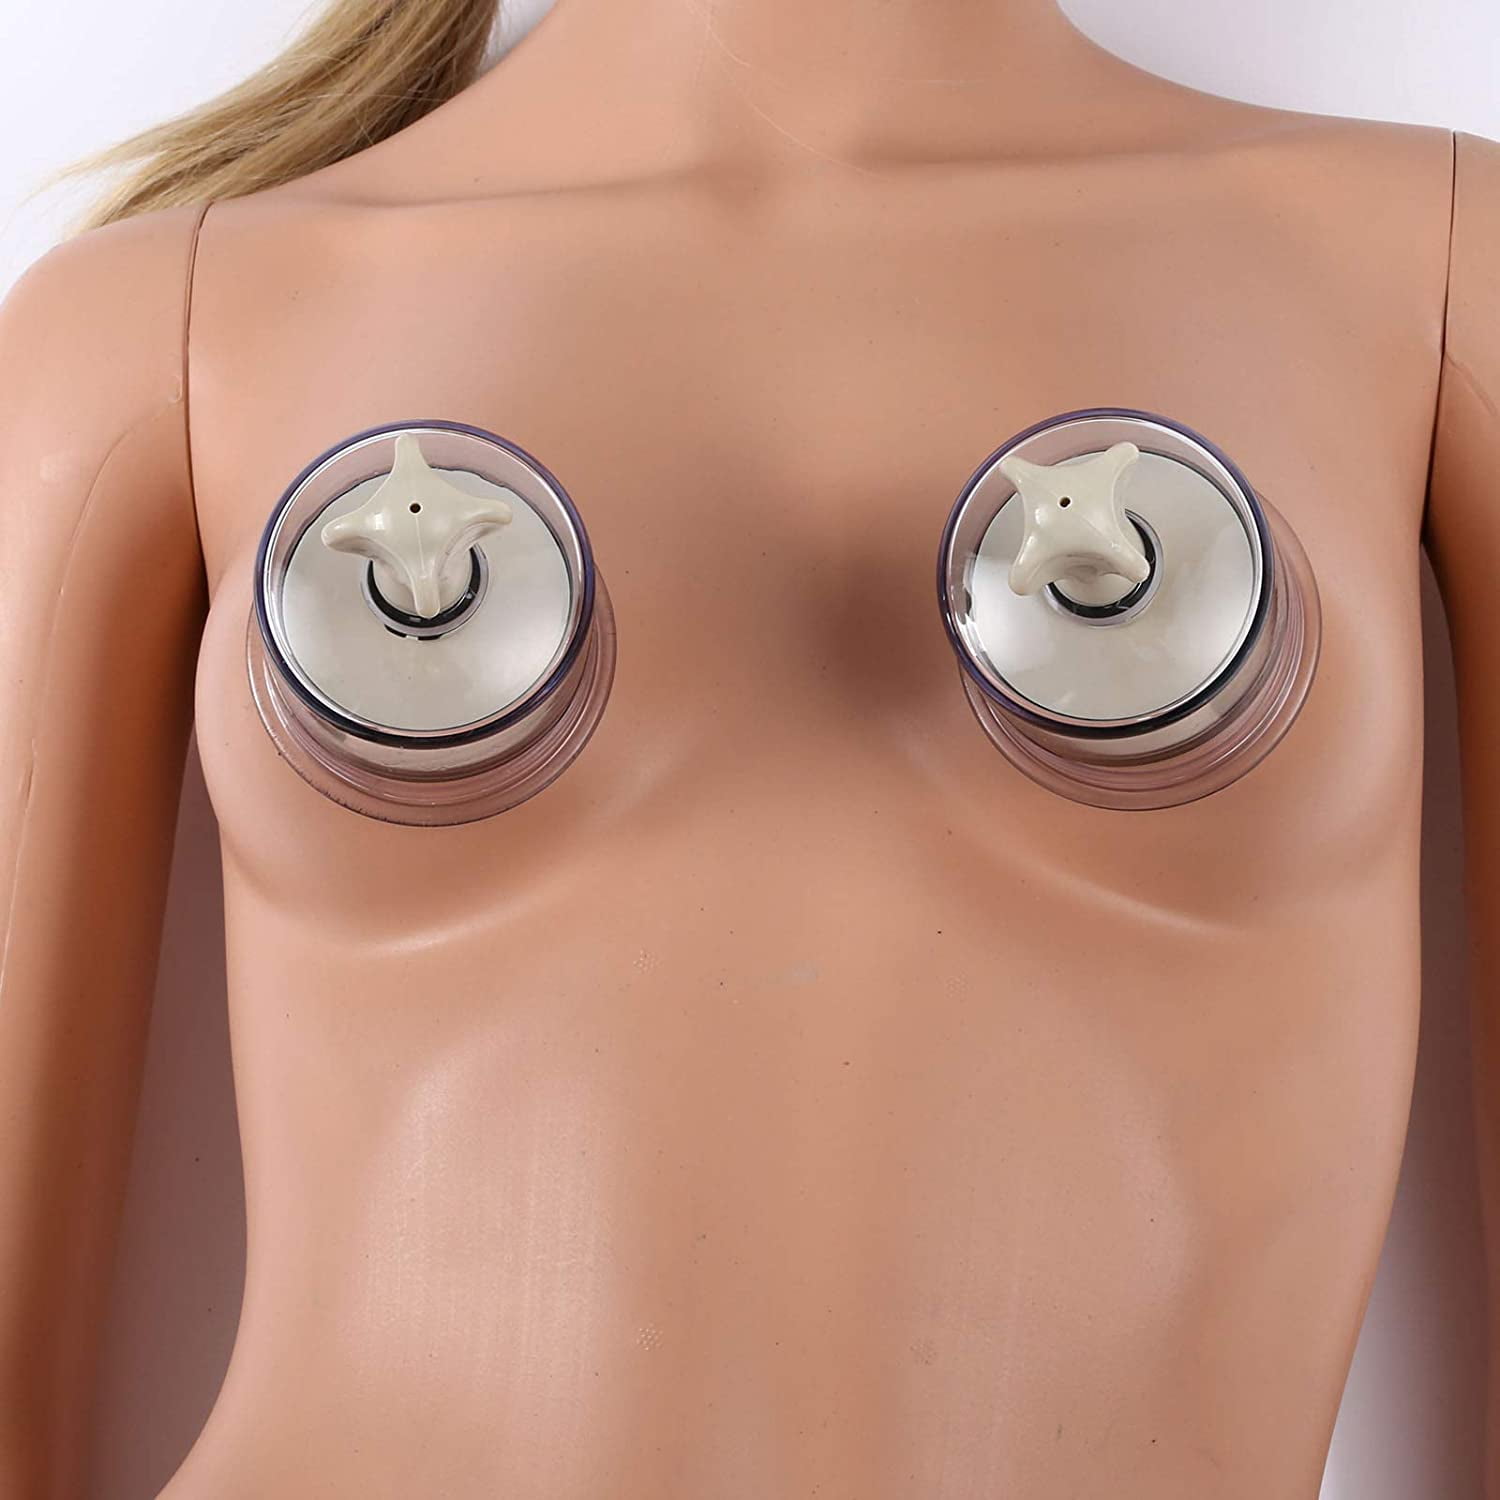 carol whatley recommends Nipple Suction Cups